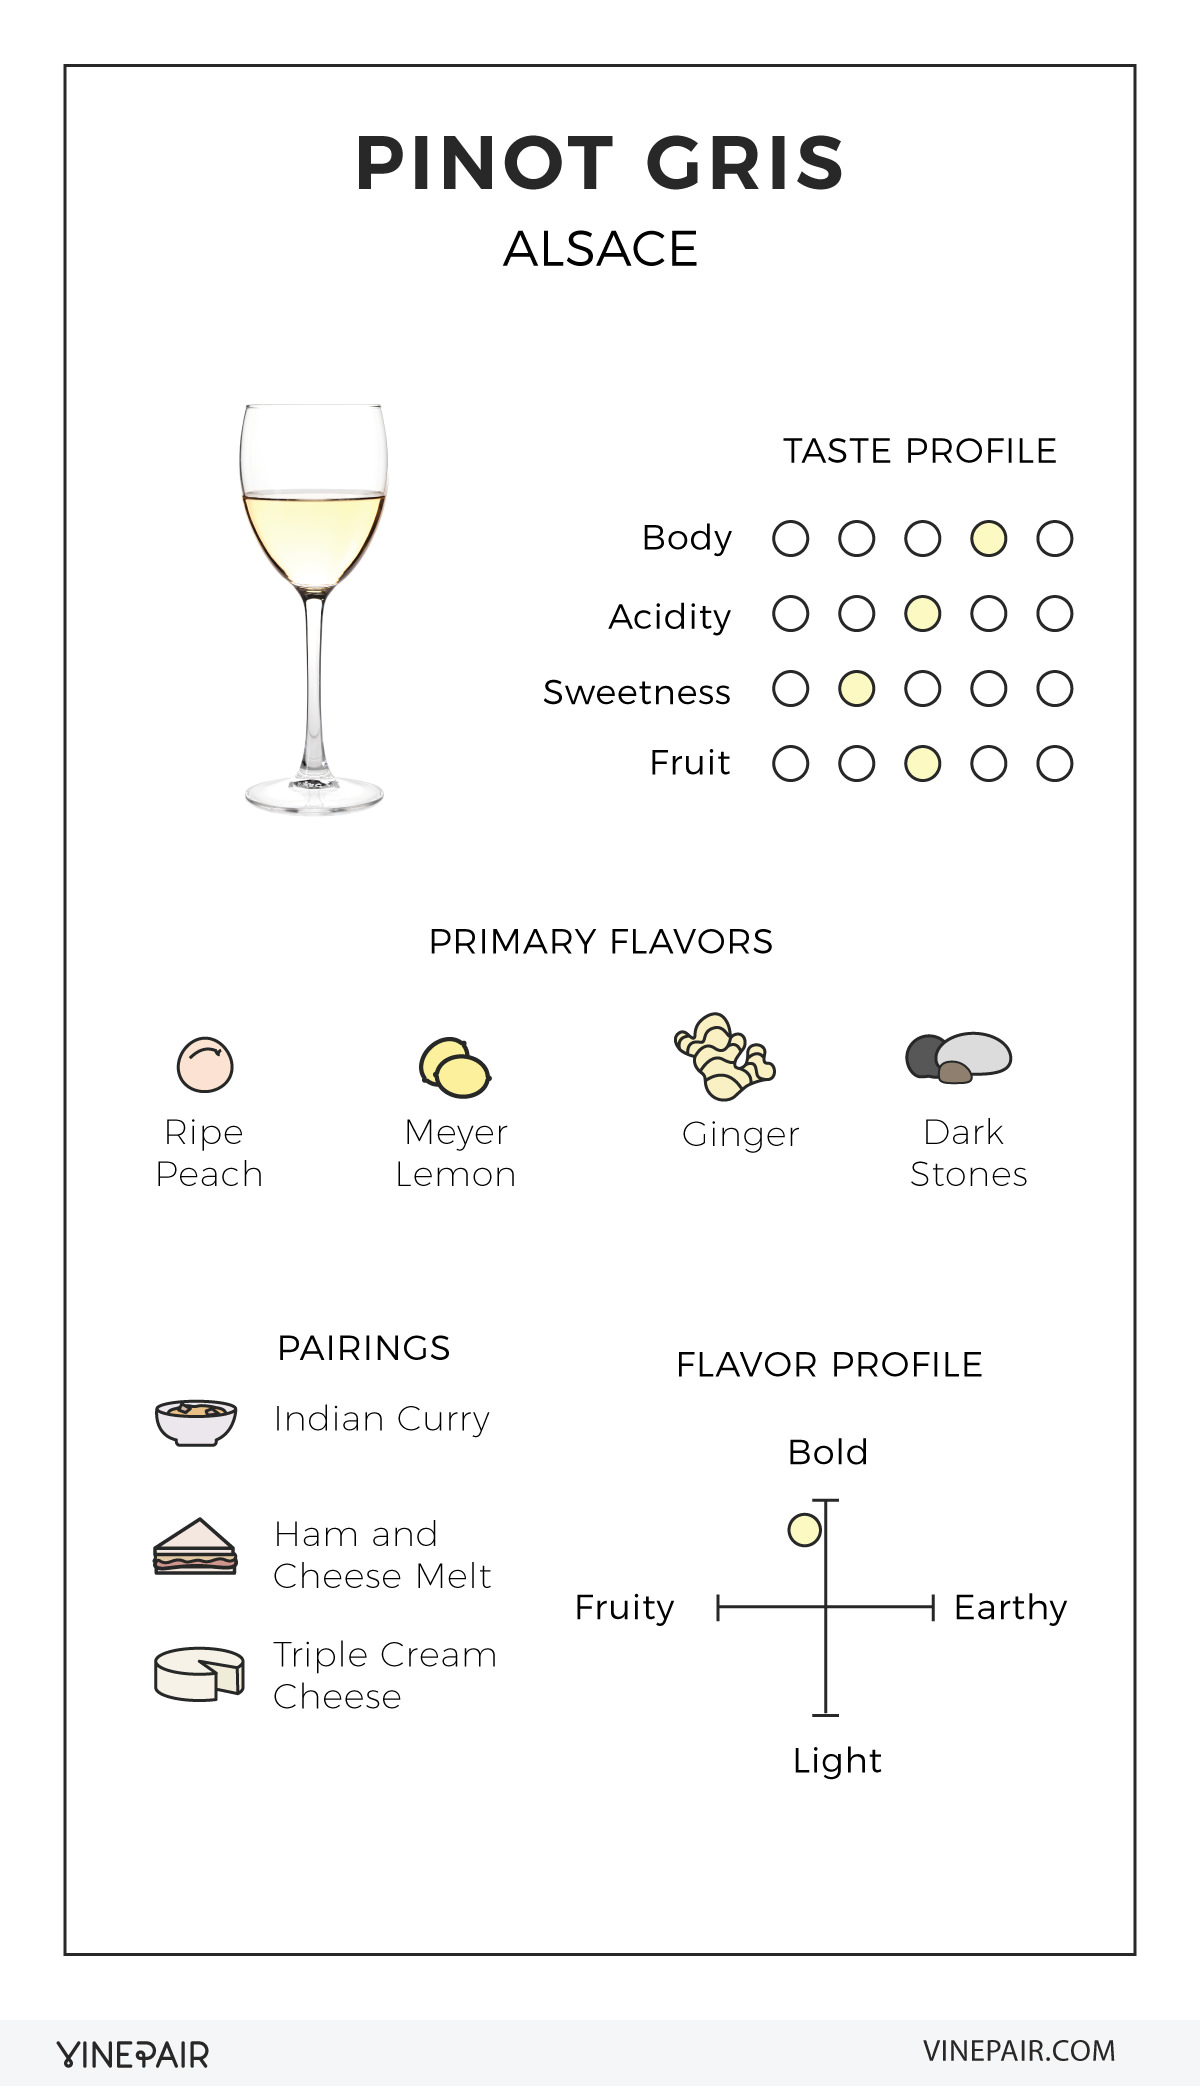 An Illustrated Guide to Pinot Gris from Alsace